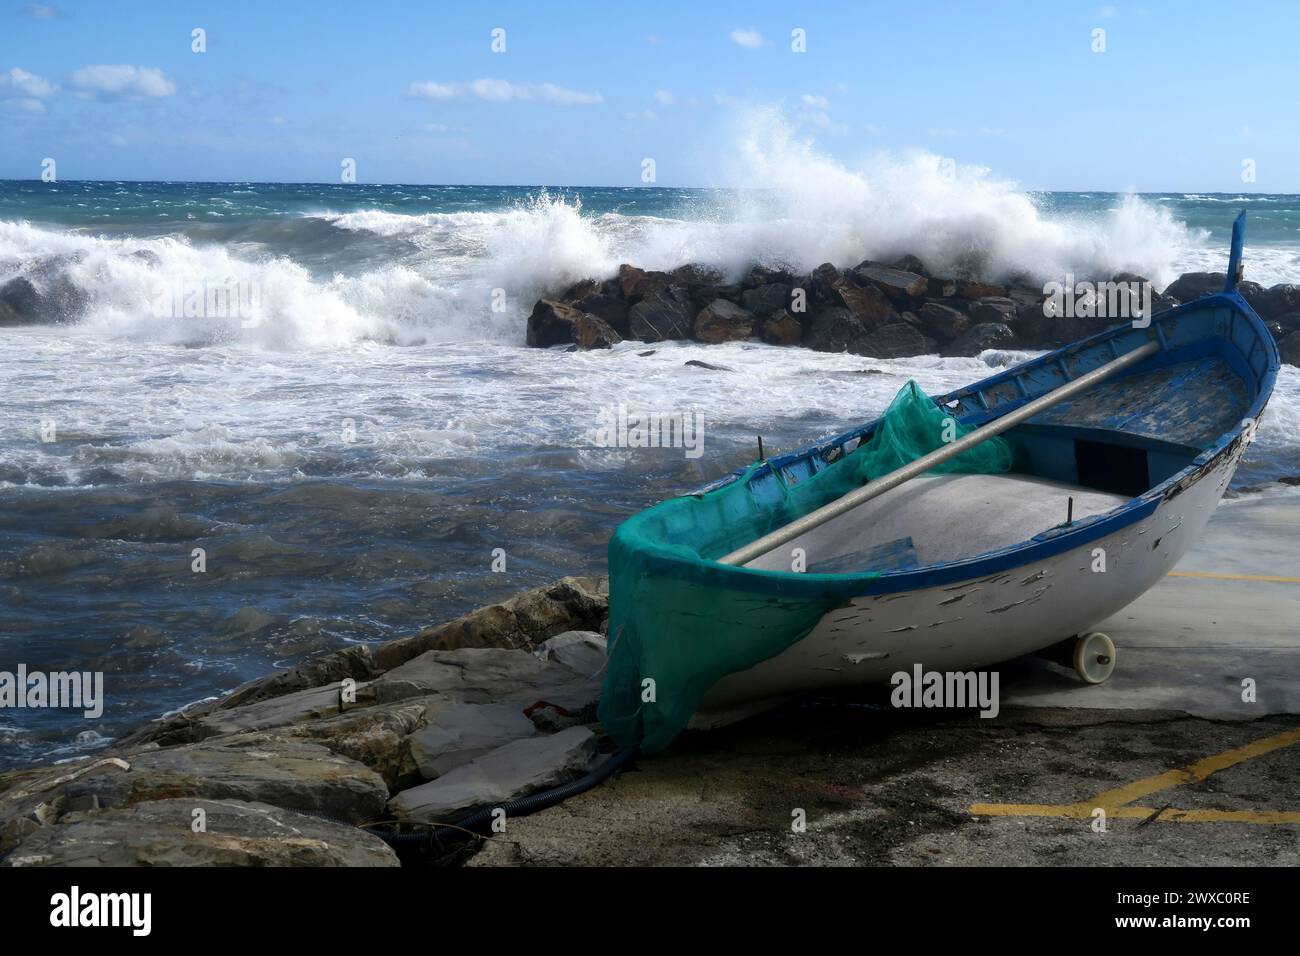 A small boat moored to a dock by the sea Stock Photo